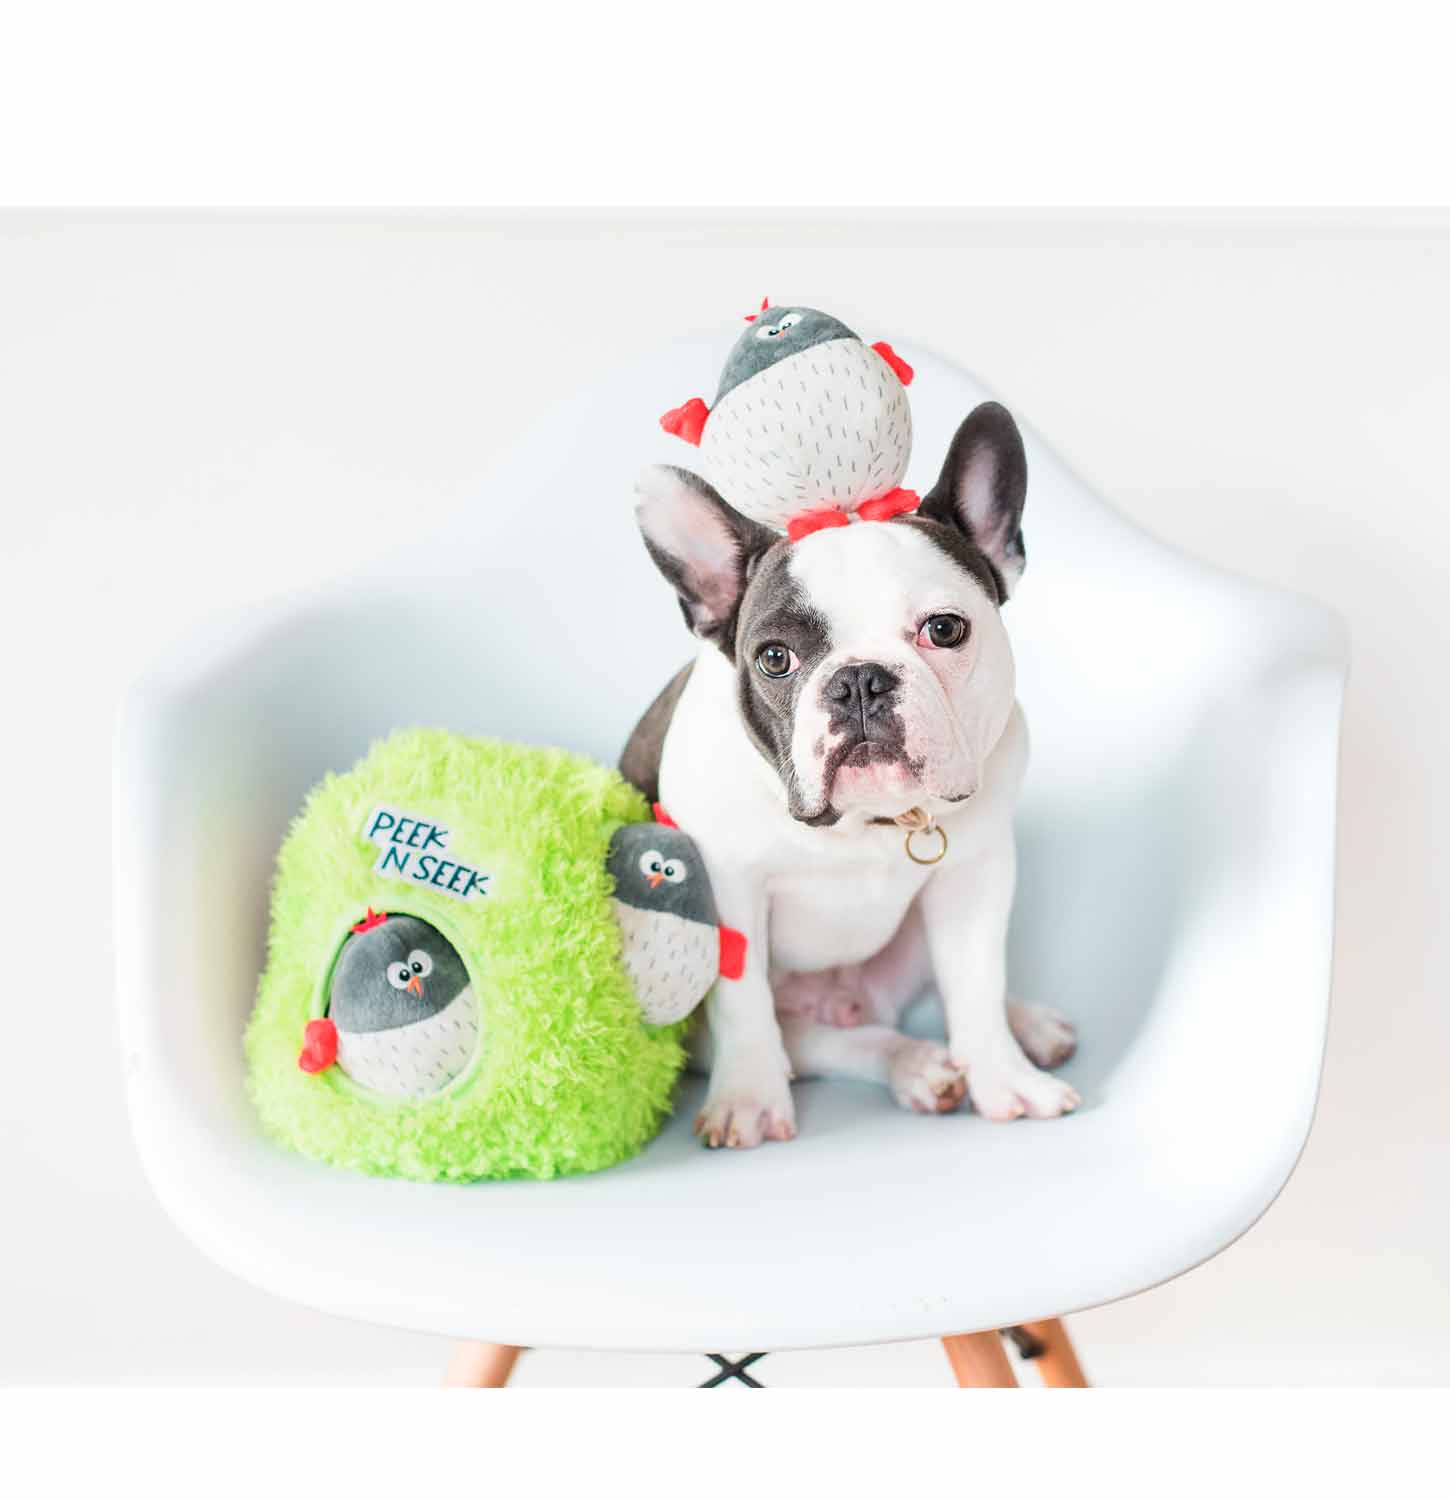 A frenchie dog sitting in a chair next to his hide and seek dog toy featuring 3 plush birds